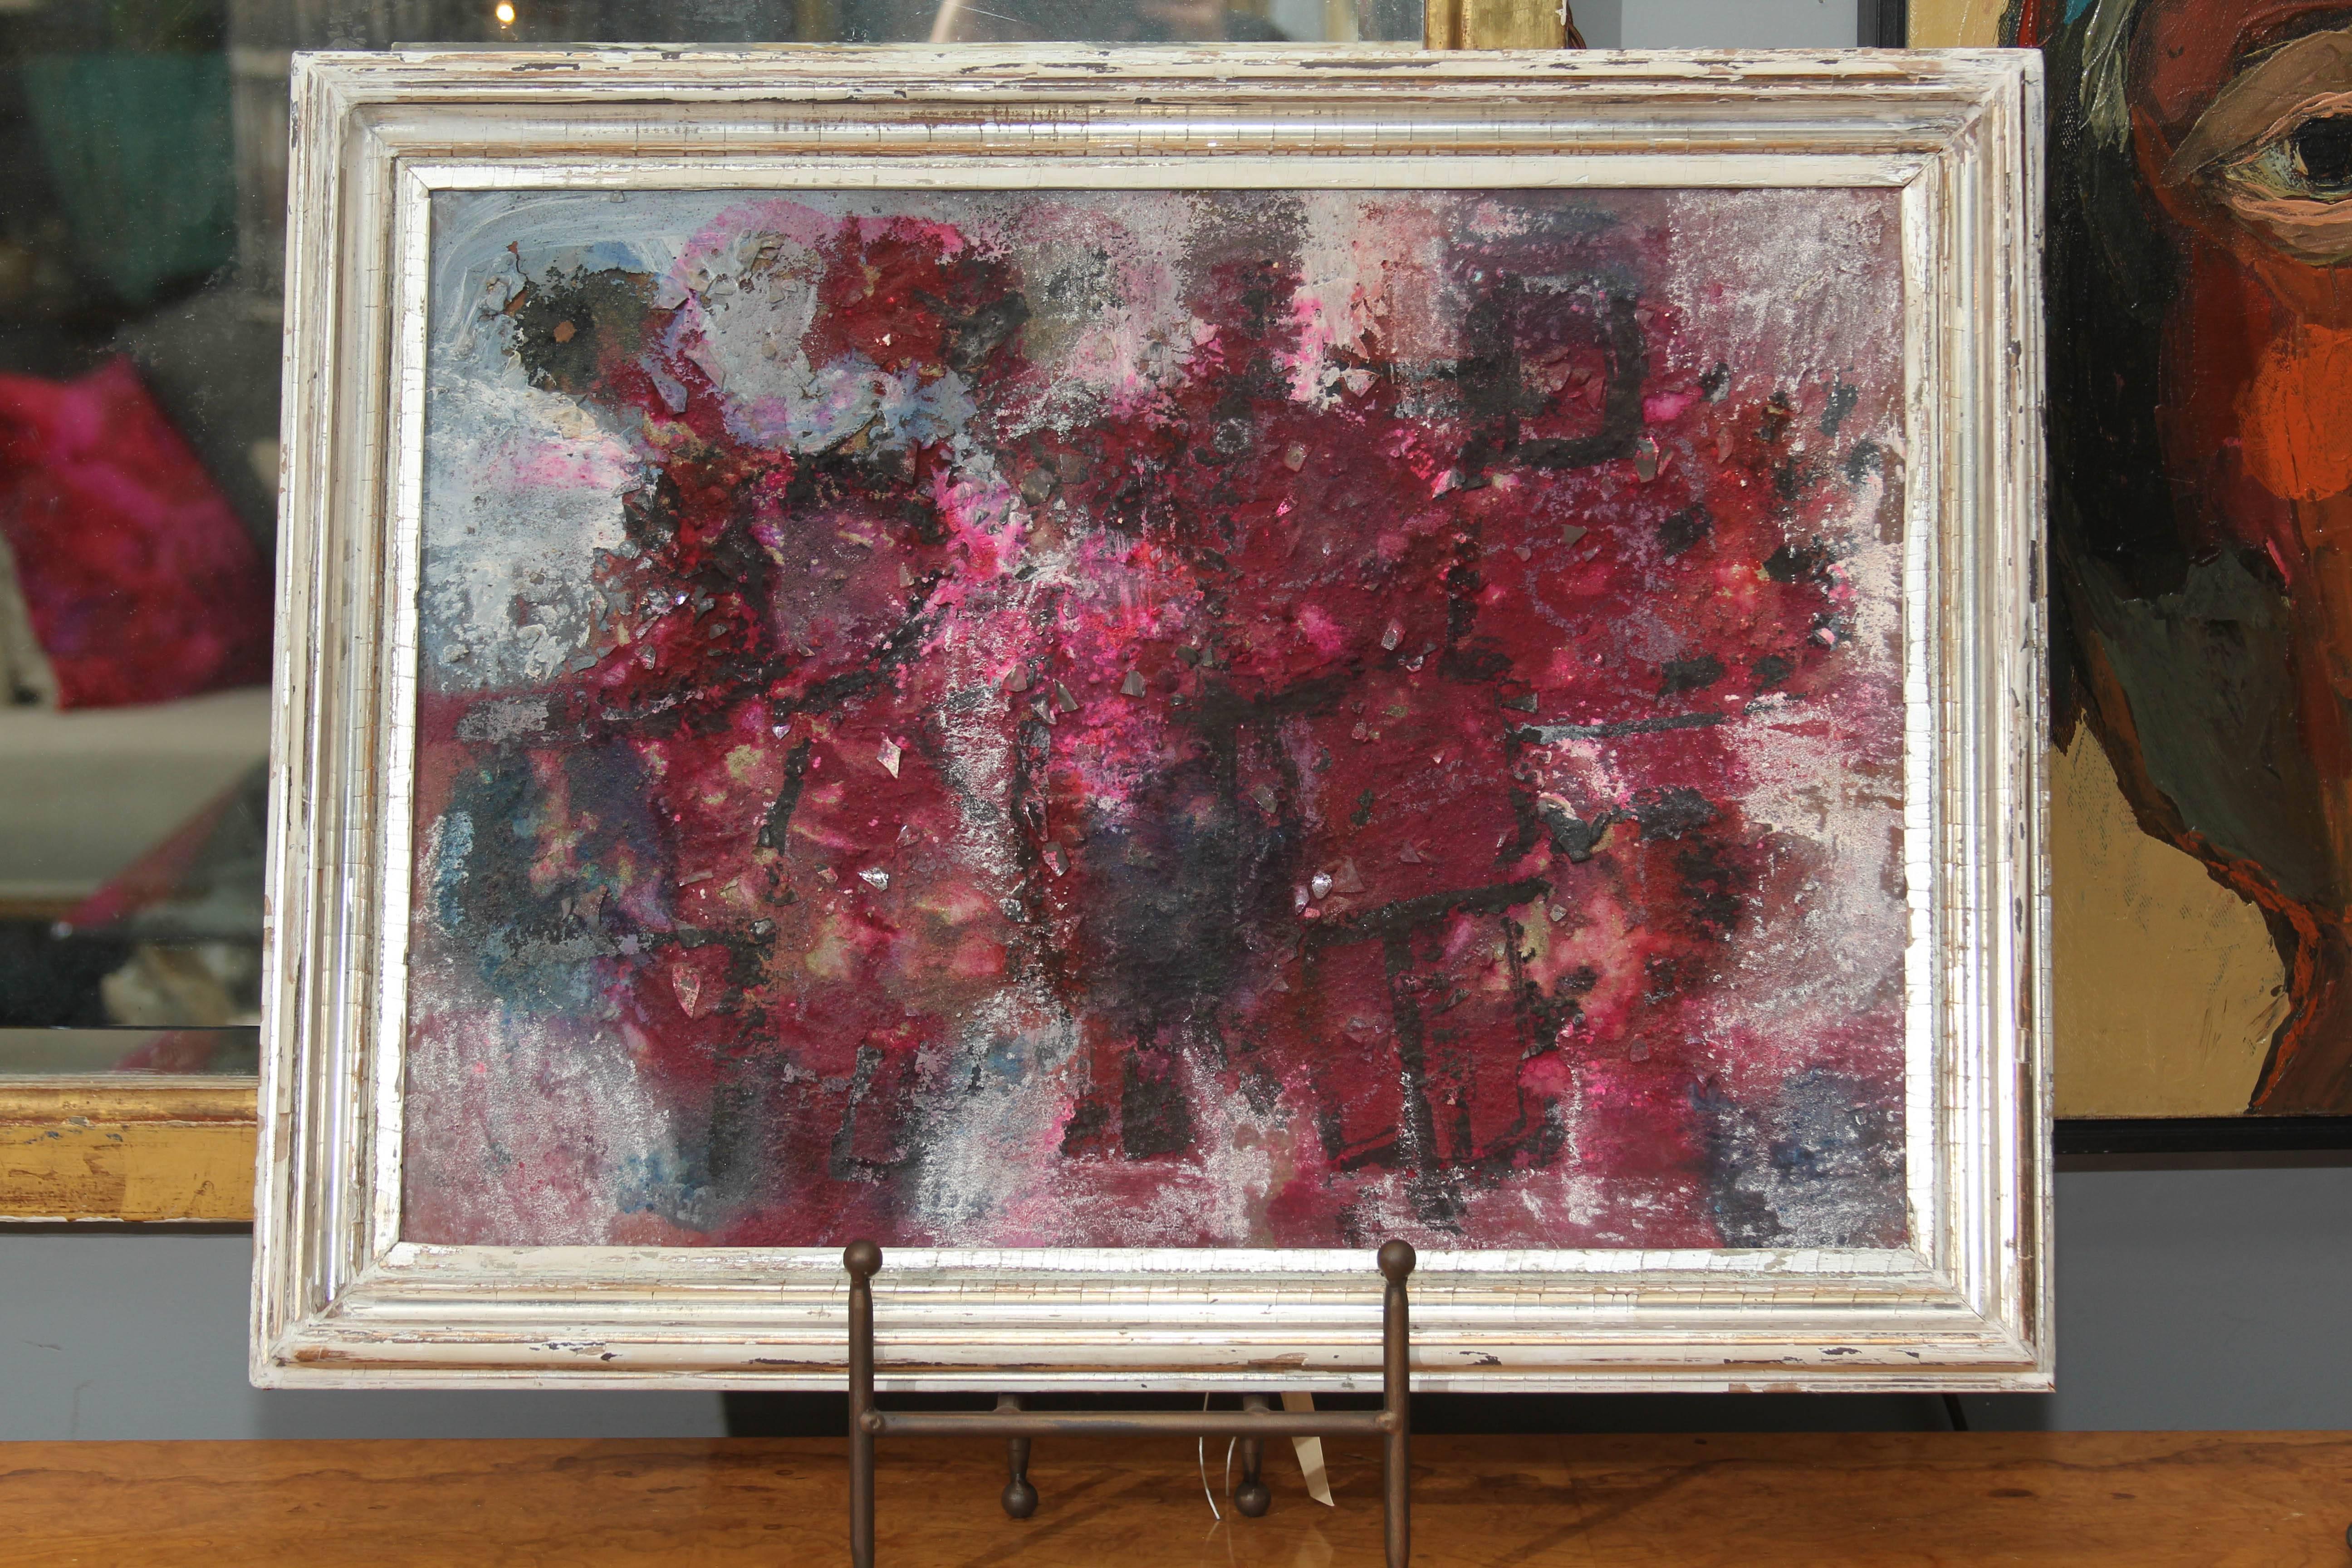 Mid-20th century abstract painting in varying shades of red with black and grey and bits of mirror suspended in the paint. Framed simply in silver gilt 19th century frame.